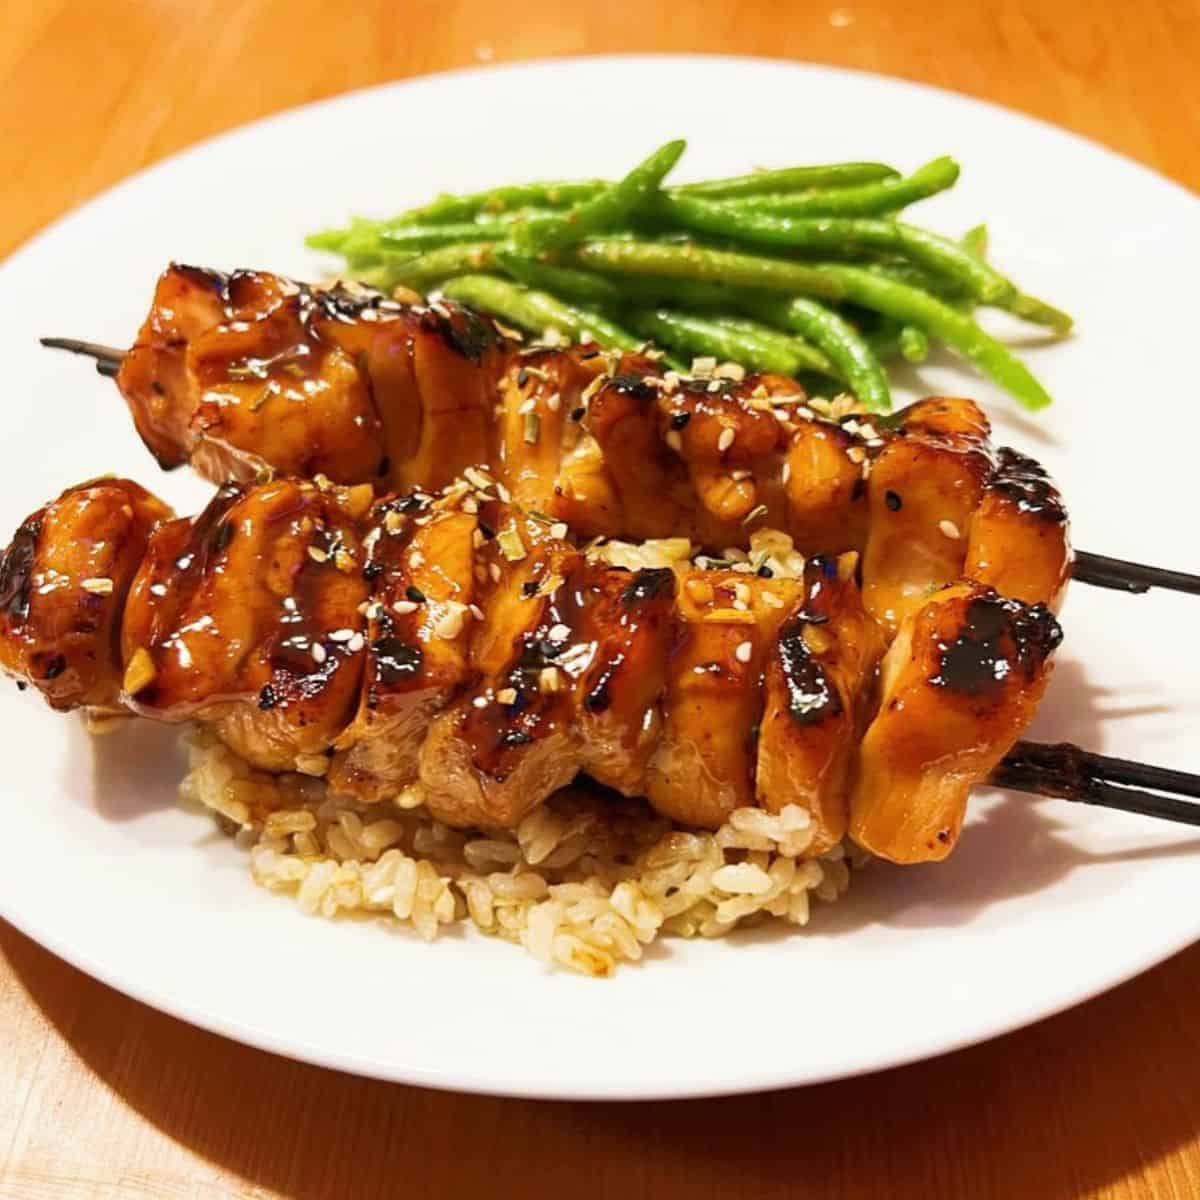 Delicious Teriyaki chicken skewers with green beans and brown rice